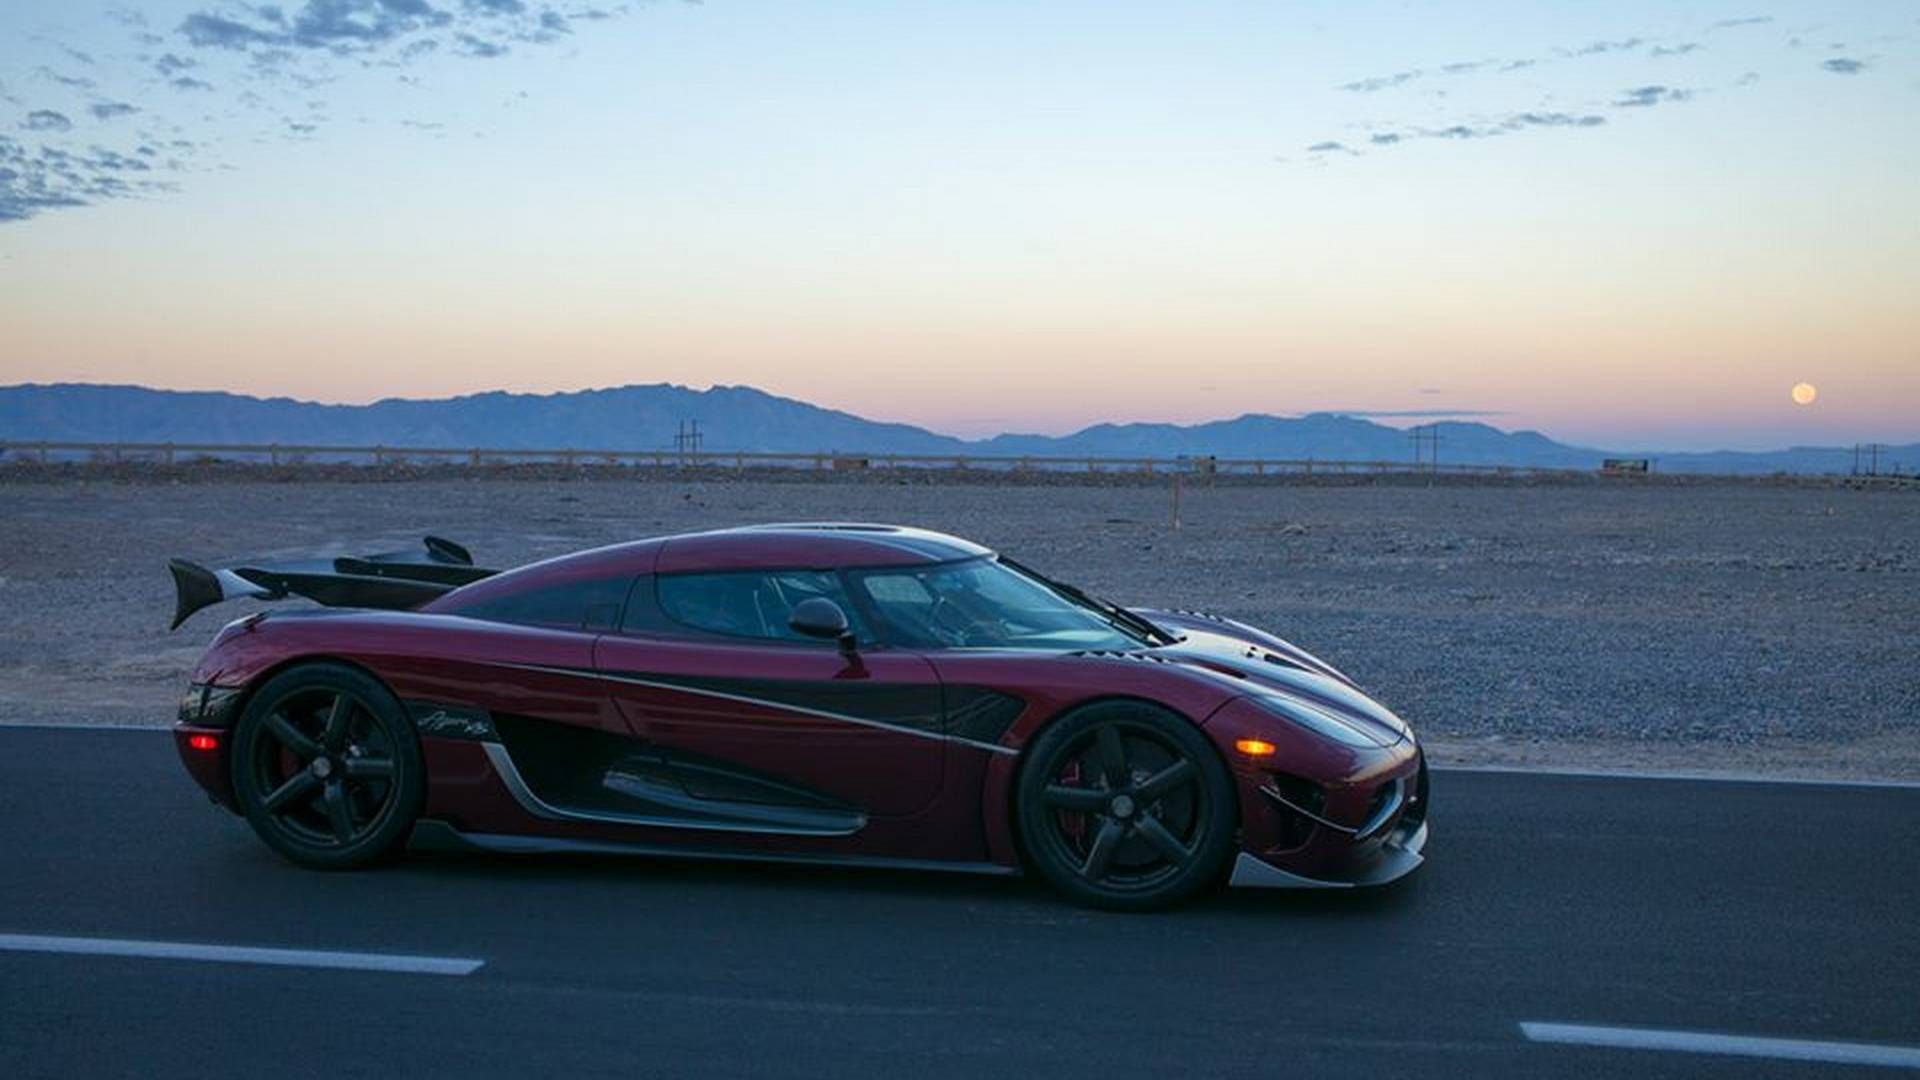 The Agera RS Sets a new bar